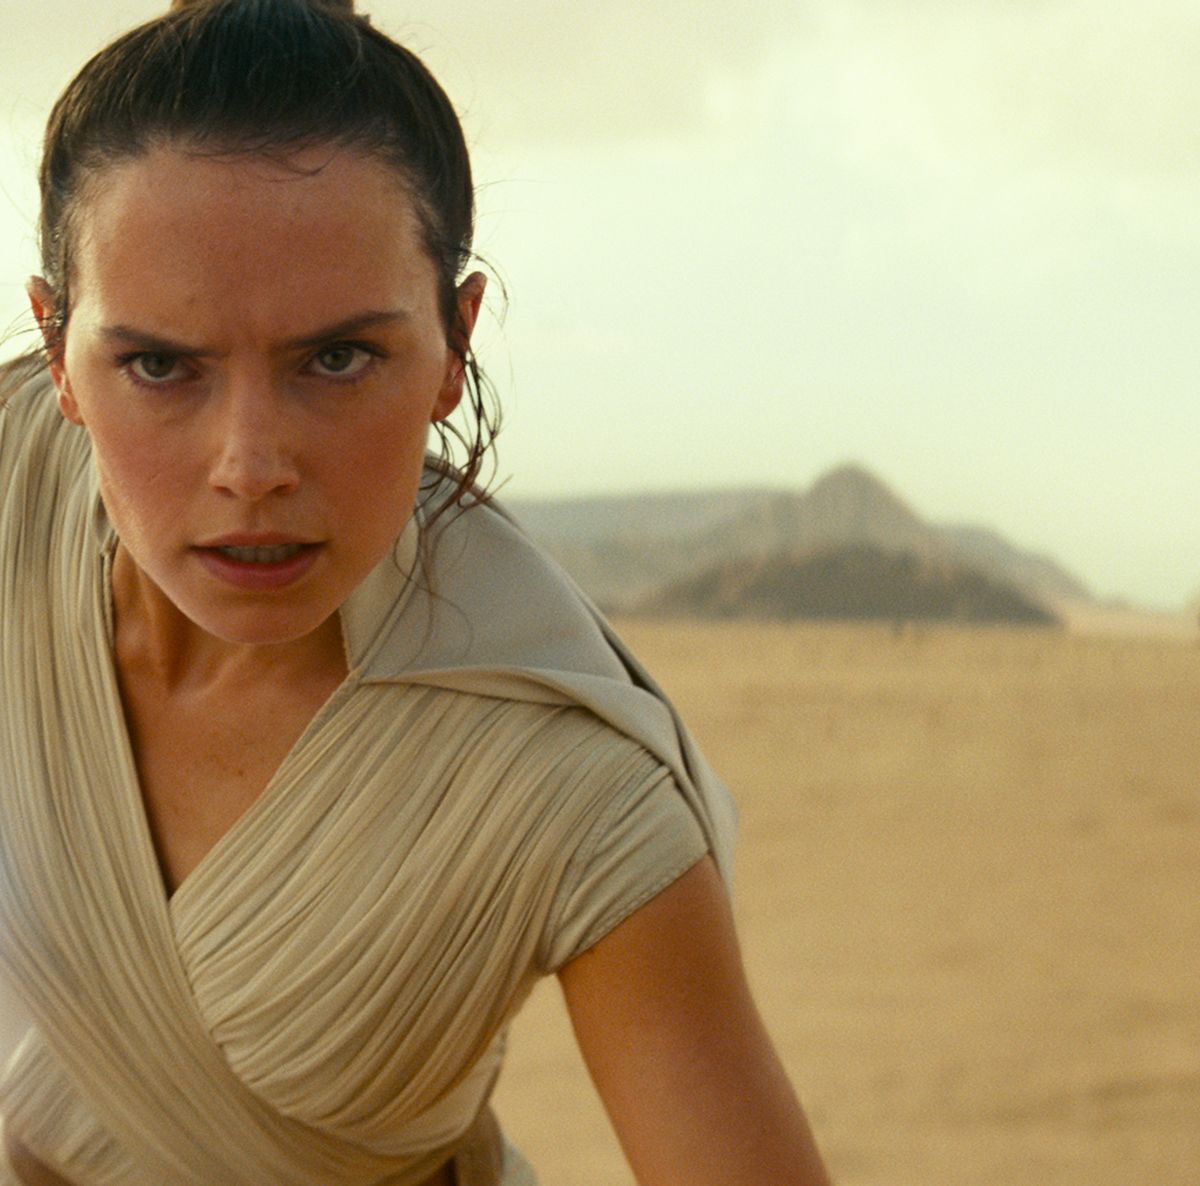 New Star Wars movies get confirmed release dates